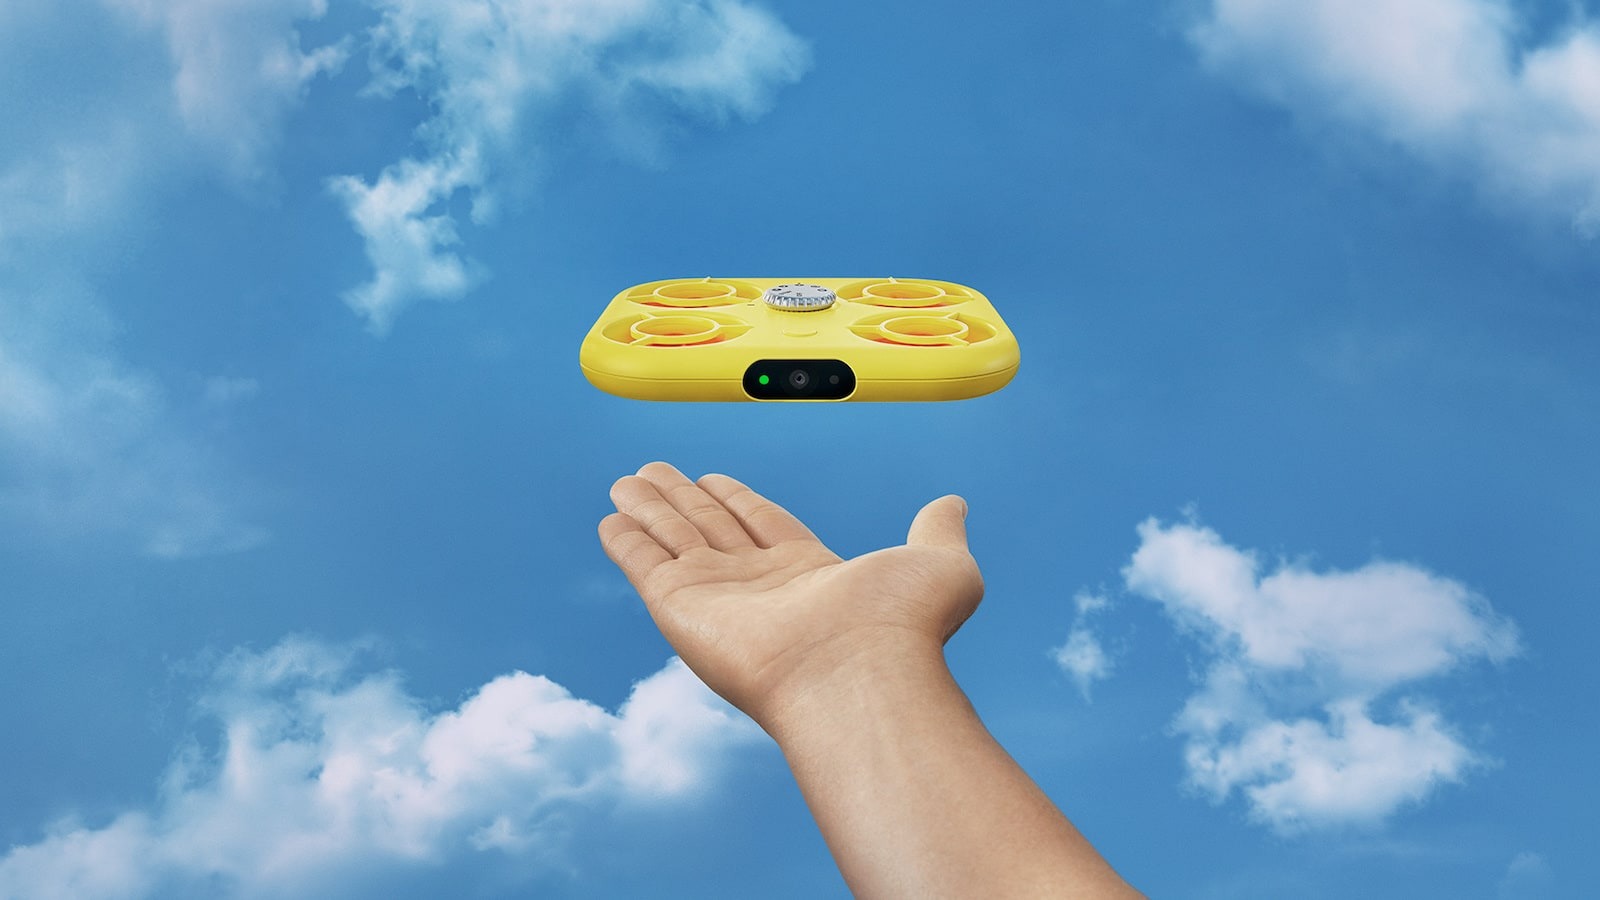 Snap Pixy flying camera can take photos of you as it hovers and follows with auto-tracking